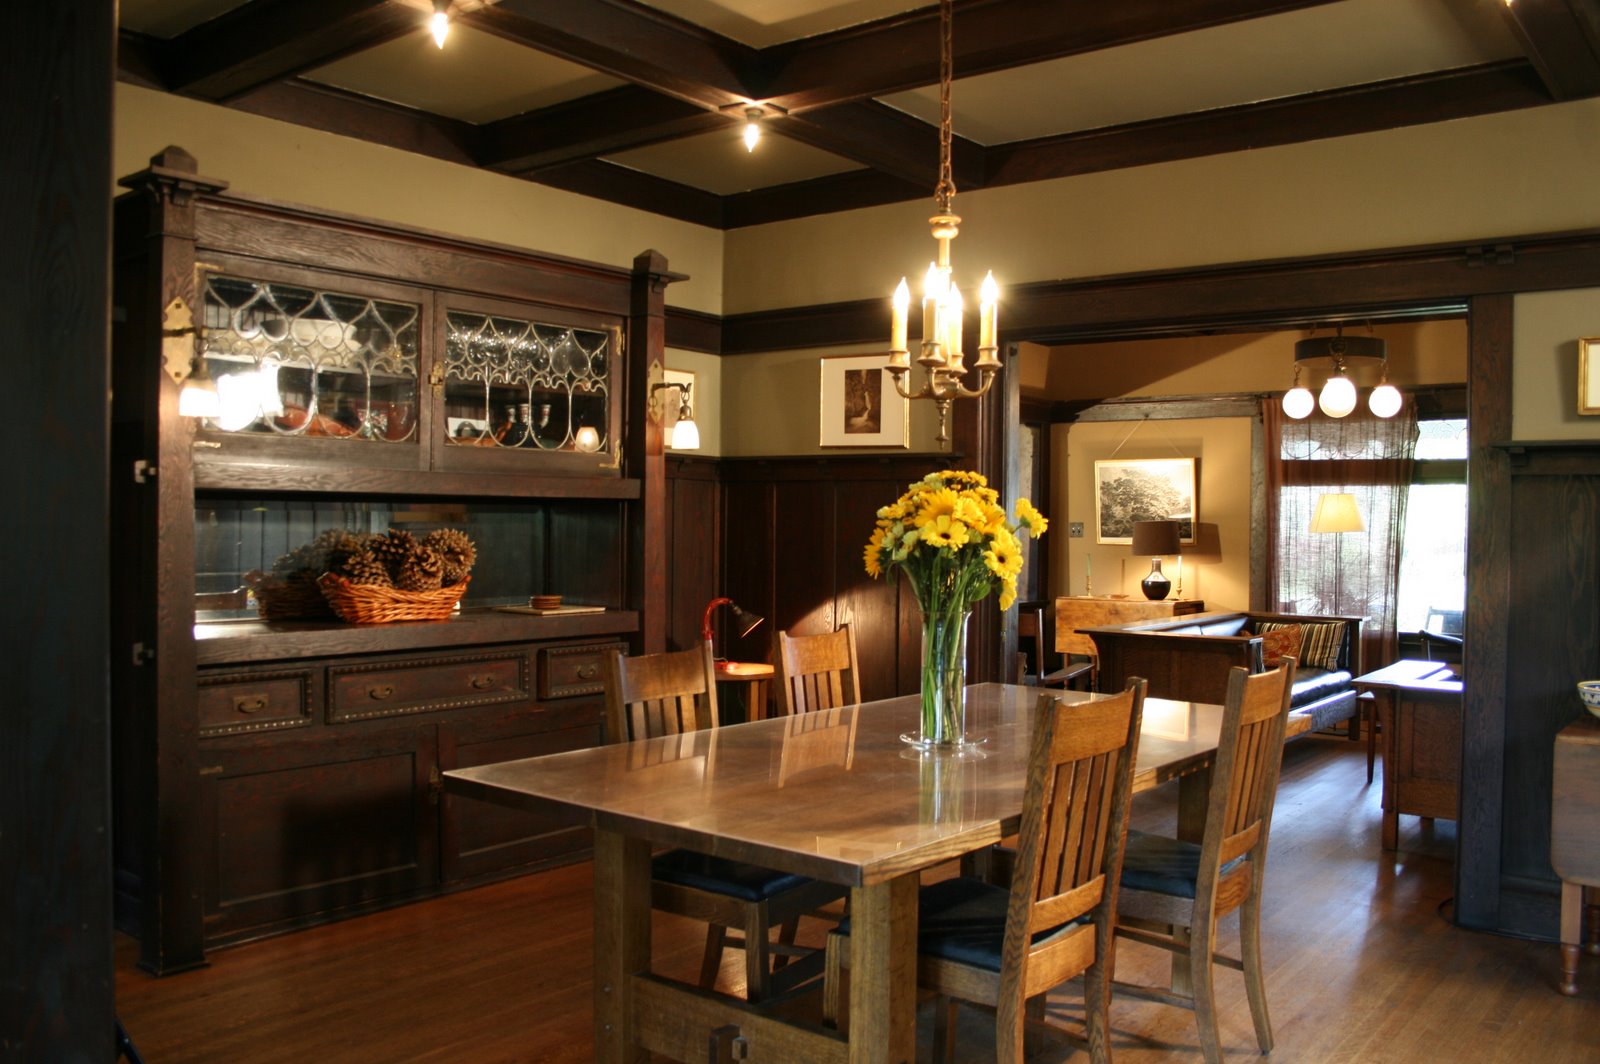 Free Download Craftsman Style Interiors Hd Wallpapers Source